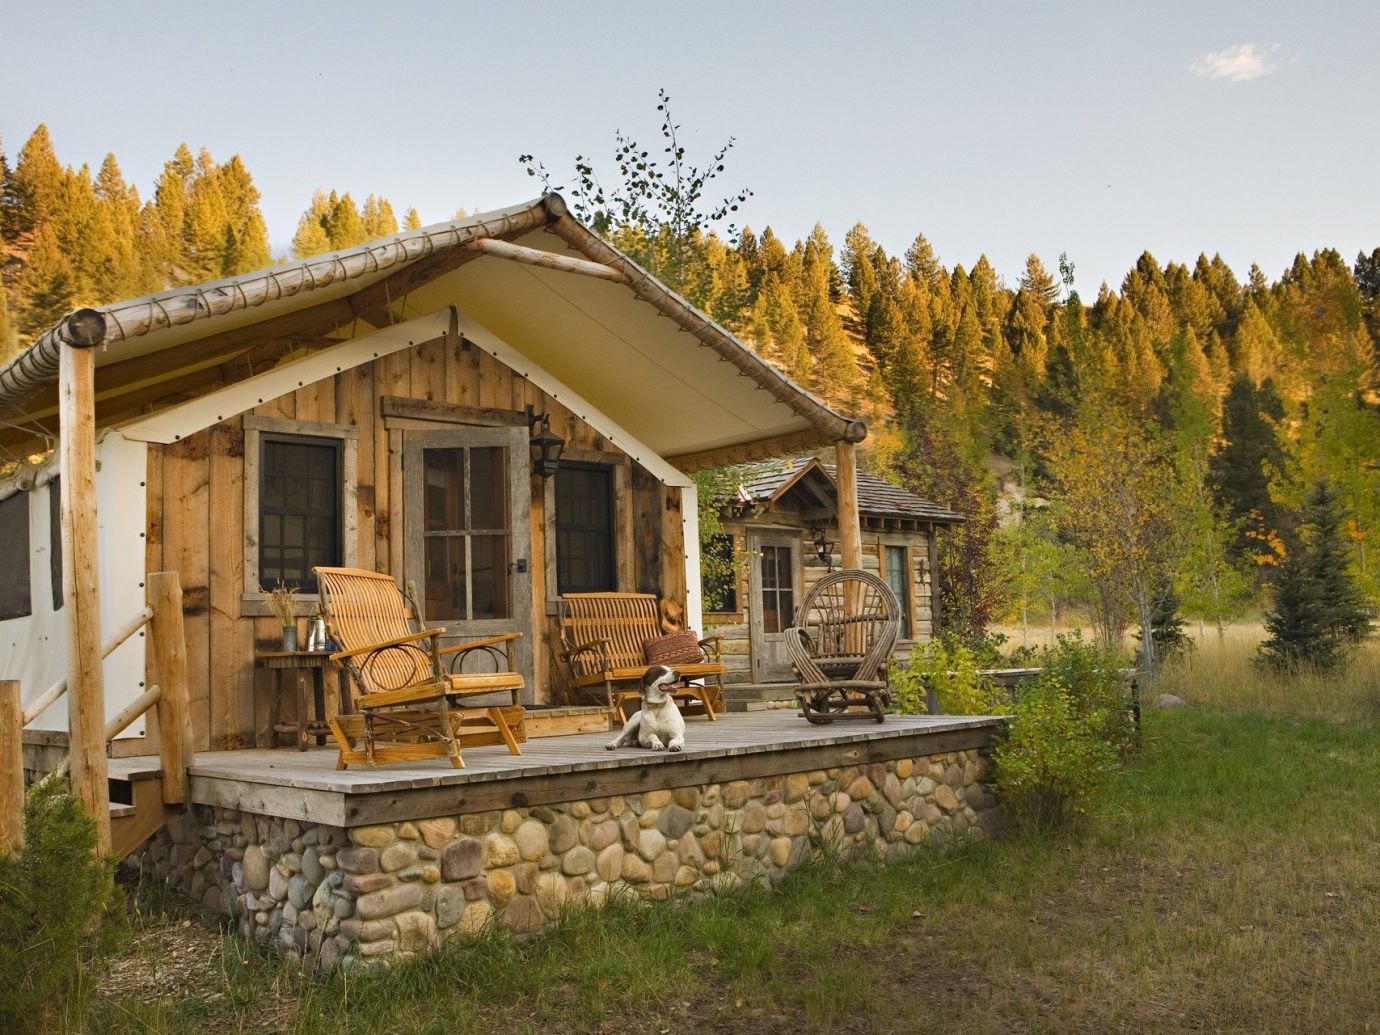 Glamping Hotels Luxury Travel Montana Outdoors + Adventure Trip Ideas Weekend Getaways outdoor grass sky tree building log cabin house property home estate cottage hut real estate old outdoor structure backyard farmhouse Villa shack